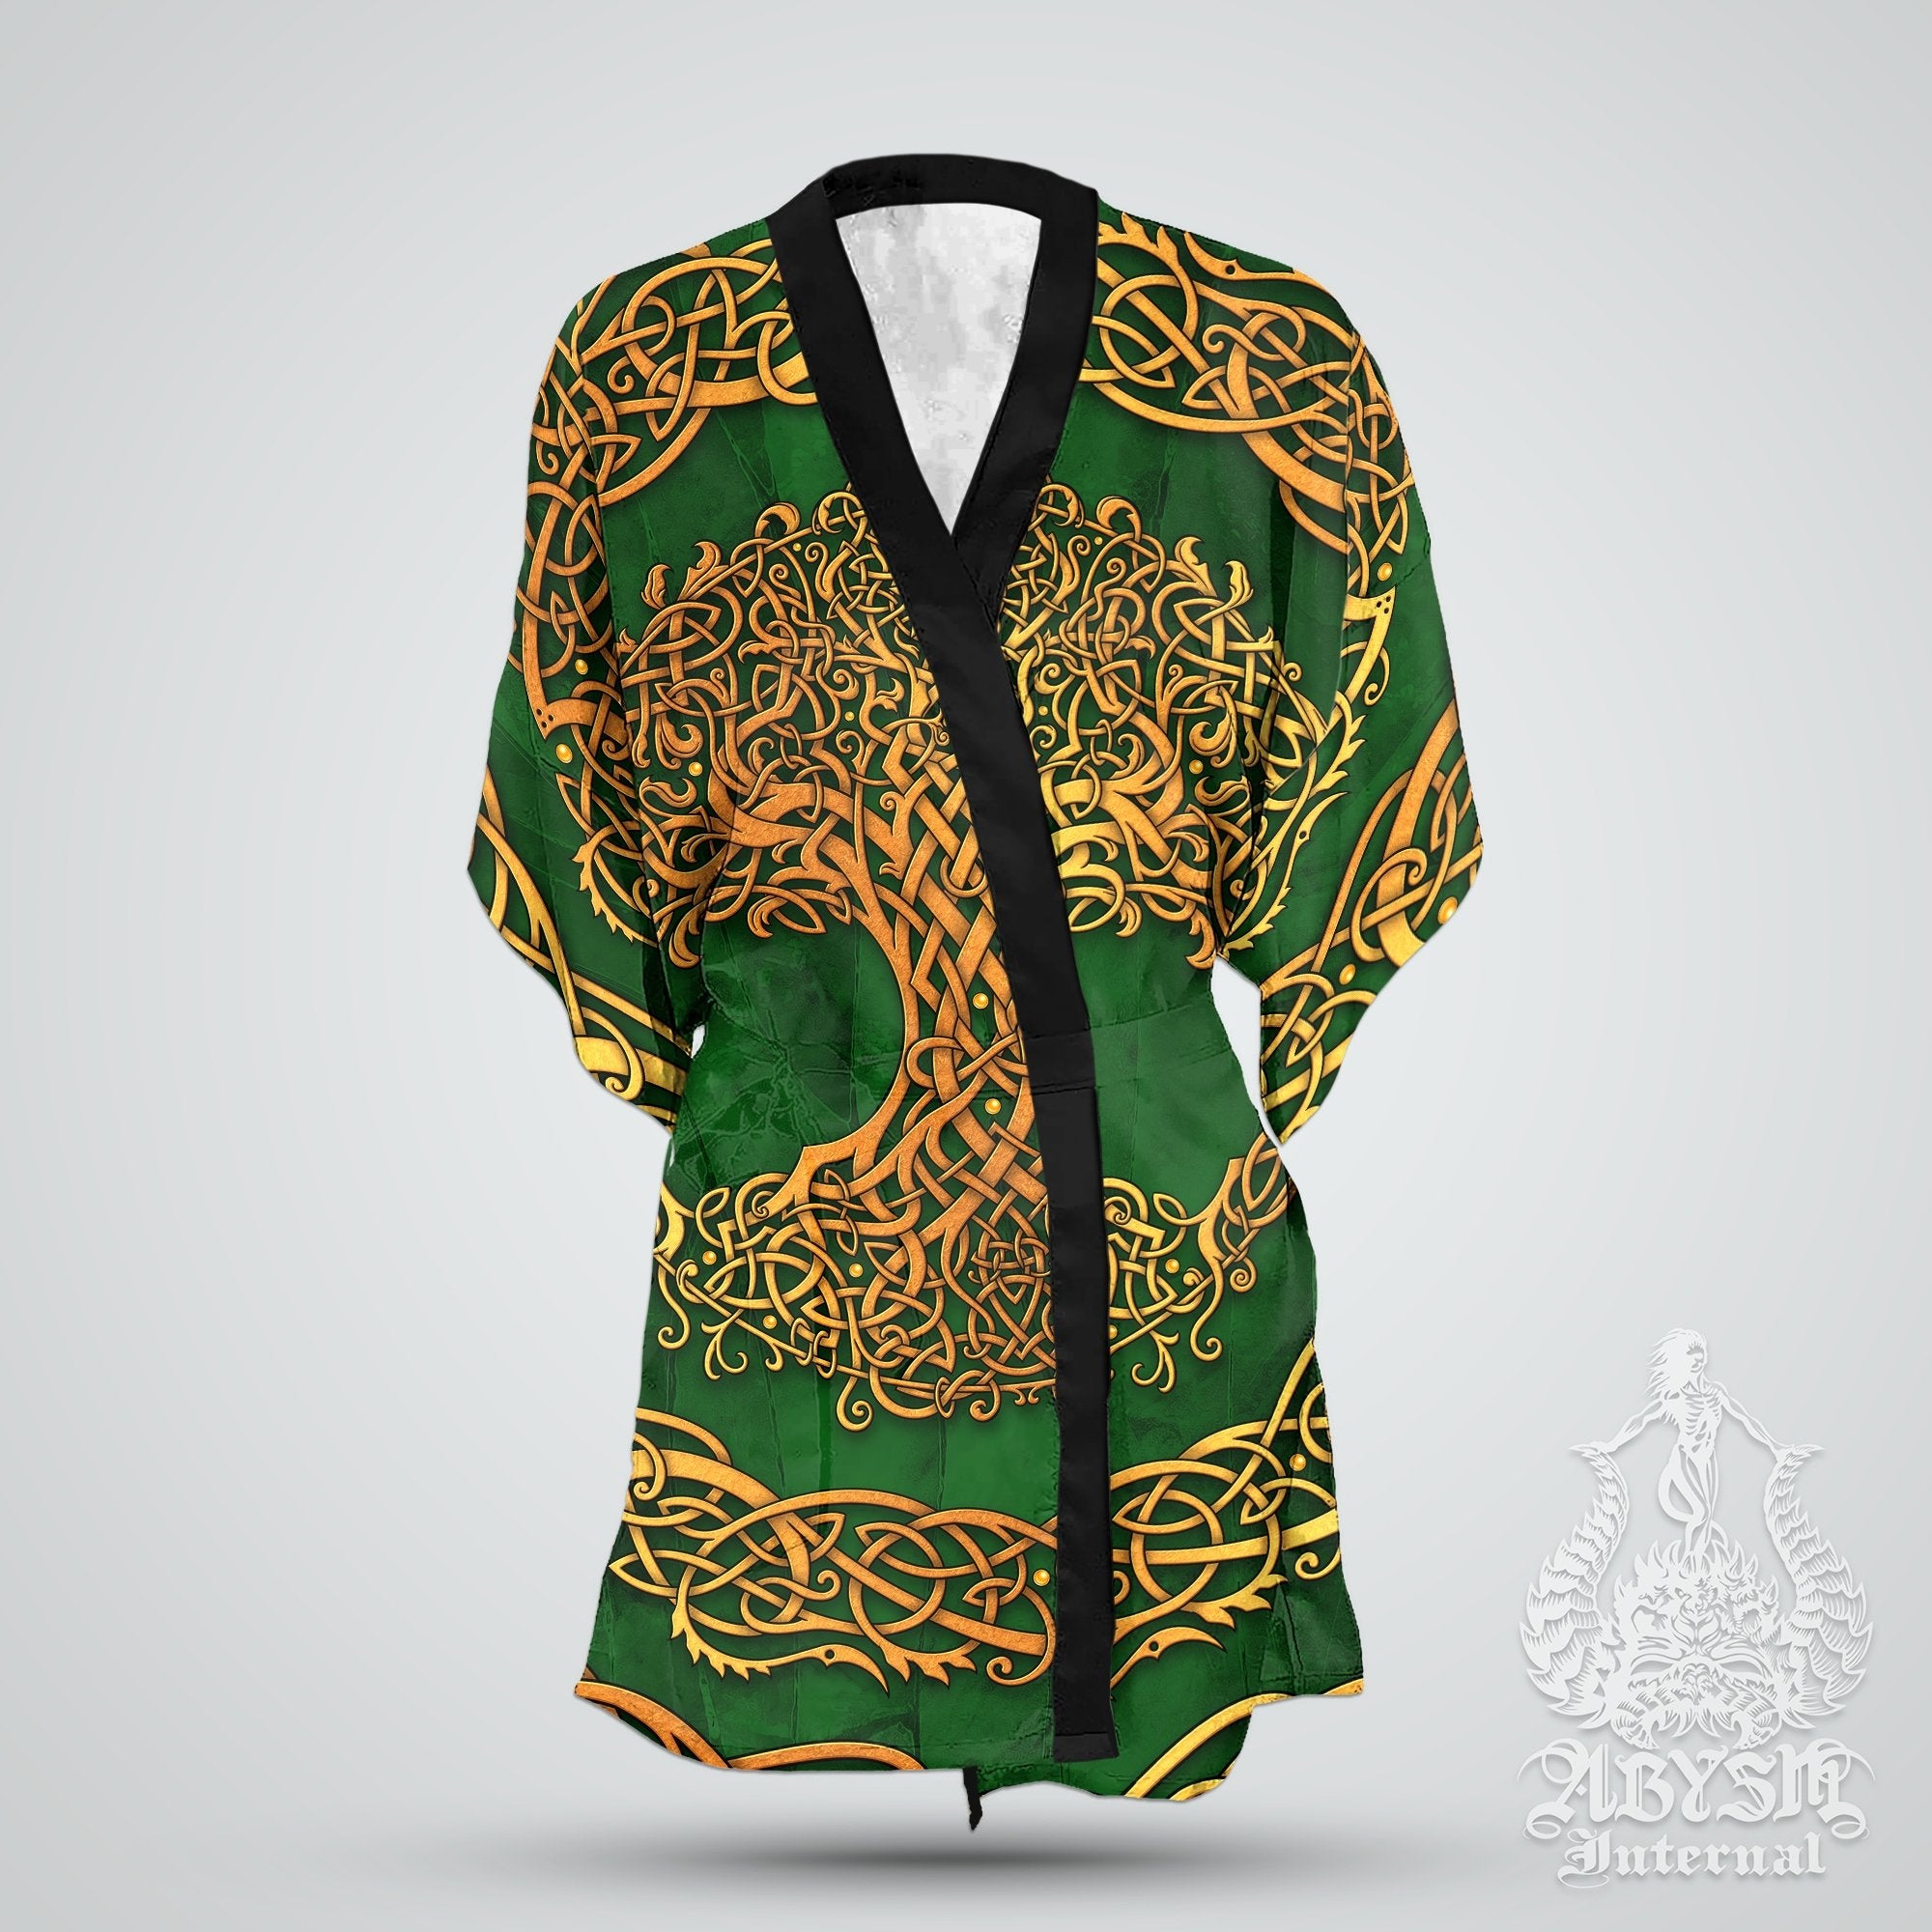 Tree of Life Cover Up, Beach Outfit, Celtic Party Kimono, Wicca Summer Festival Robe, Witchy Indie and Alternative Clothing, Unisex - Gold Green - Abysm Internal